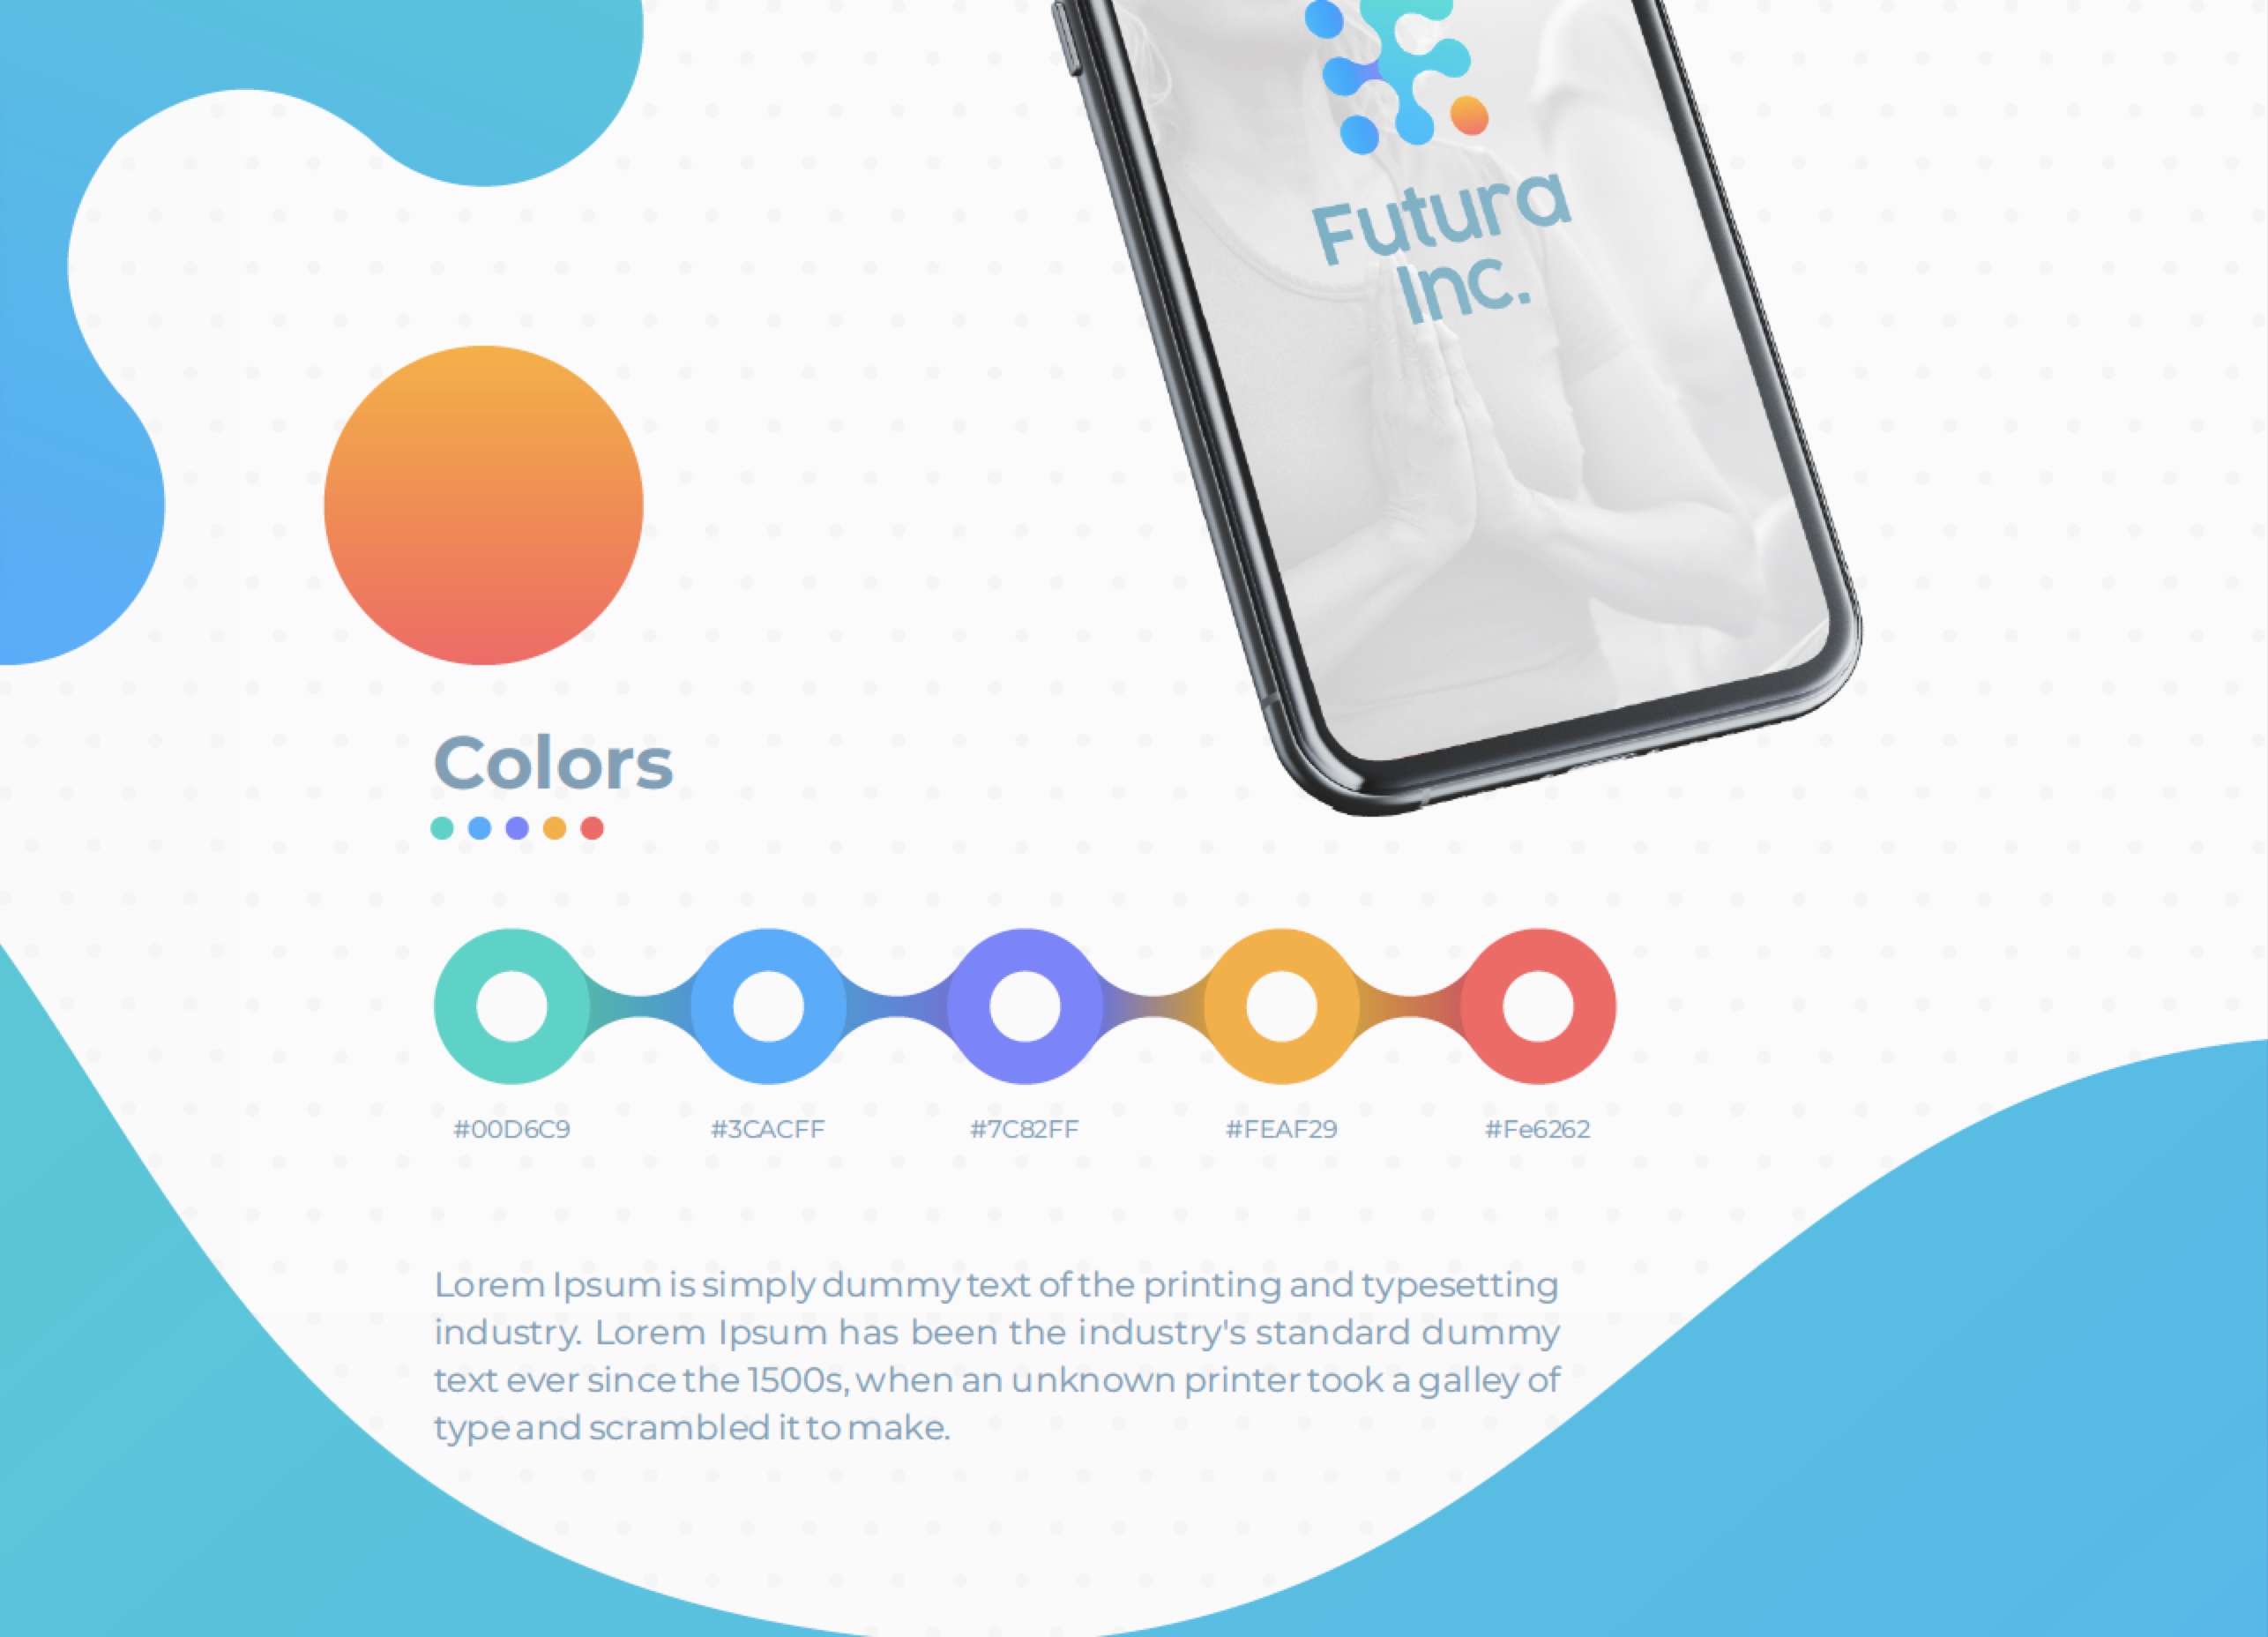 Futura Inc Color Template and Patterns.jpg